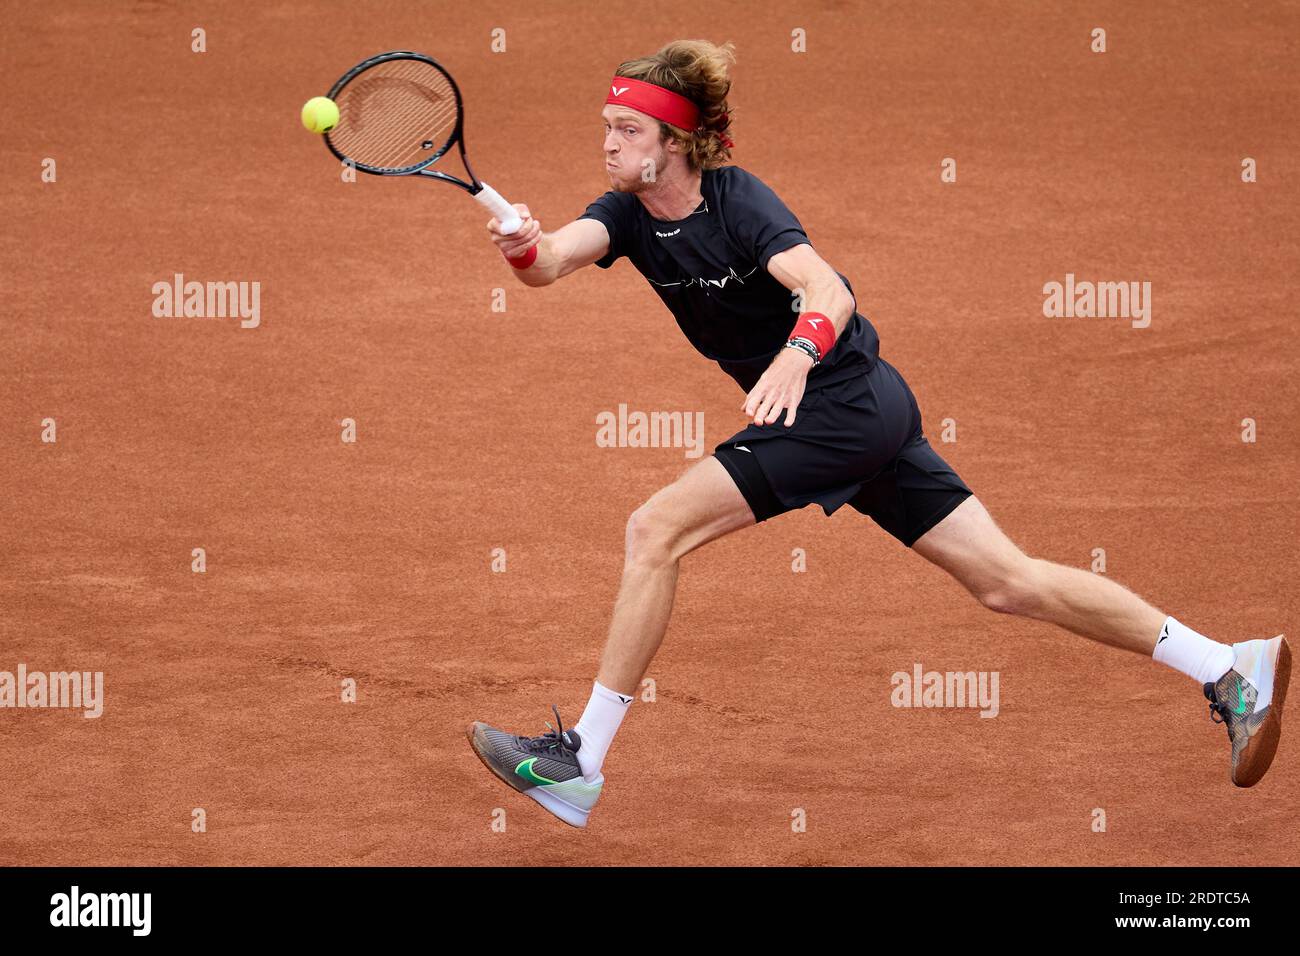 BÅSTAD 20230723 Andrey Rublev, Russia, in the final against Casper Ruud, Norway, during the Swedish Open, the ATP tournament in Båstad, Sweden, on Sunday, July 23, 2023